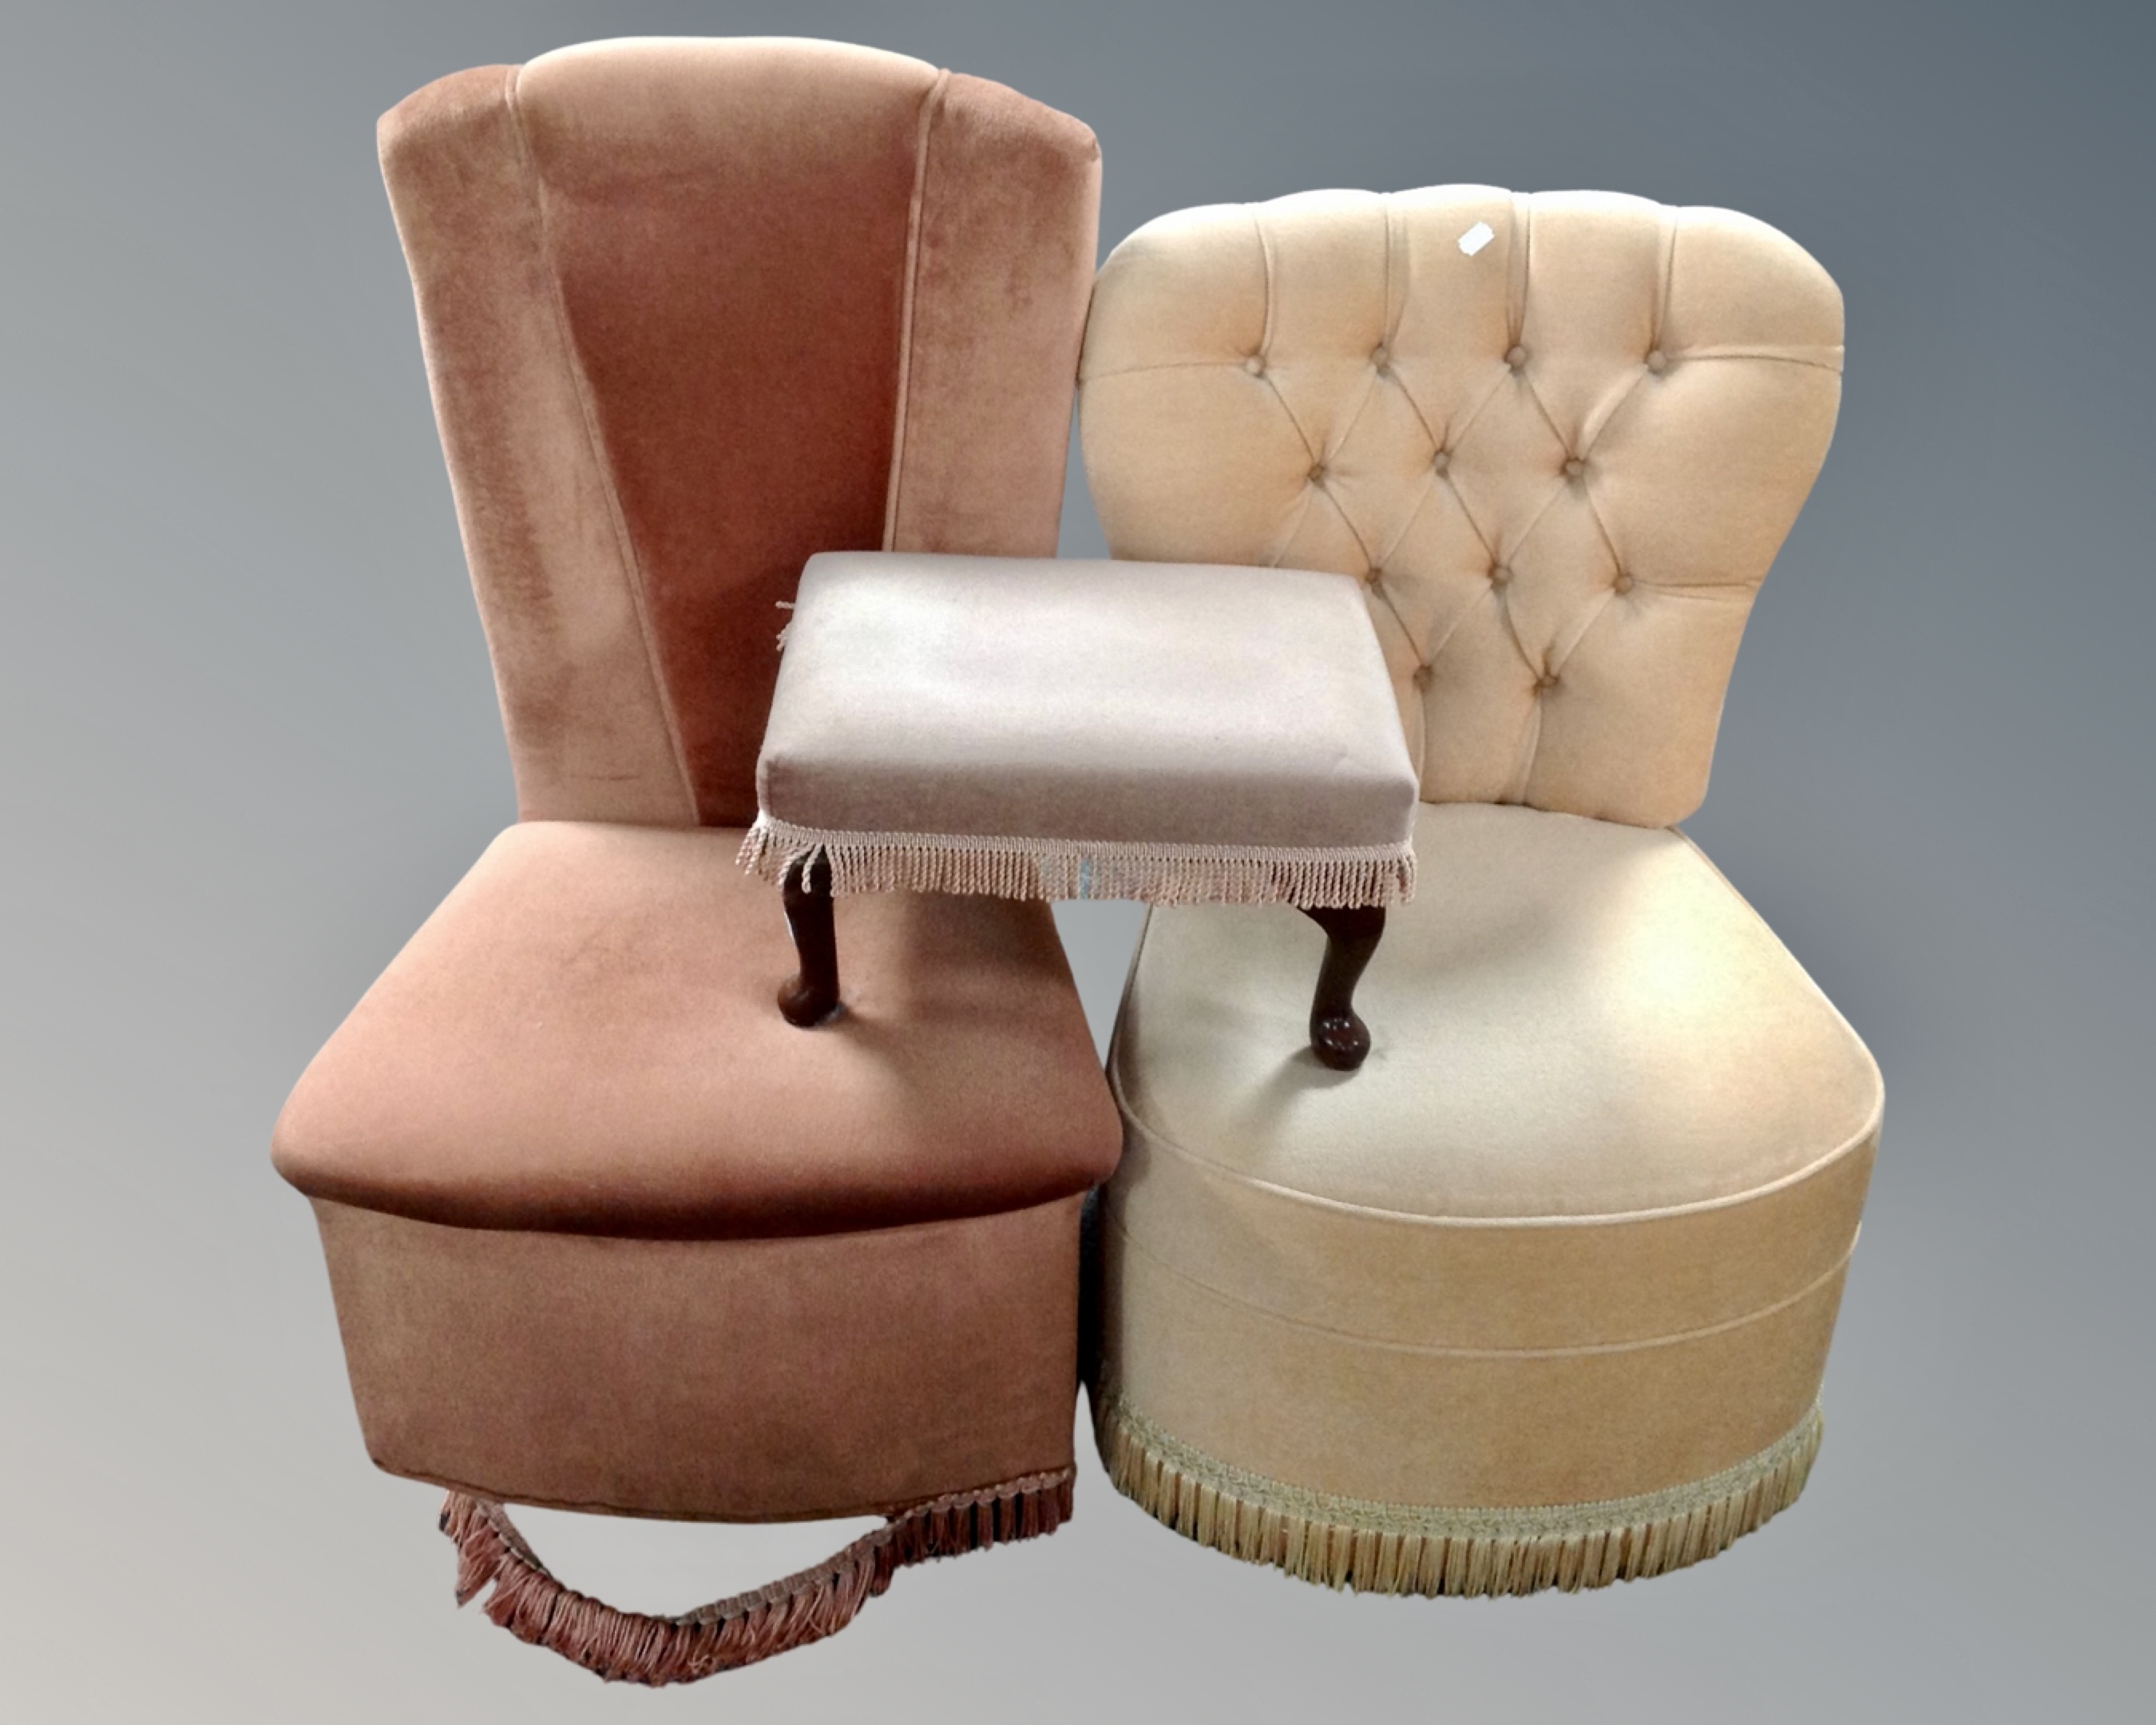 Two bedroom chairs upholstered in dralon together with a footstool.